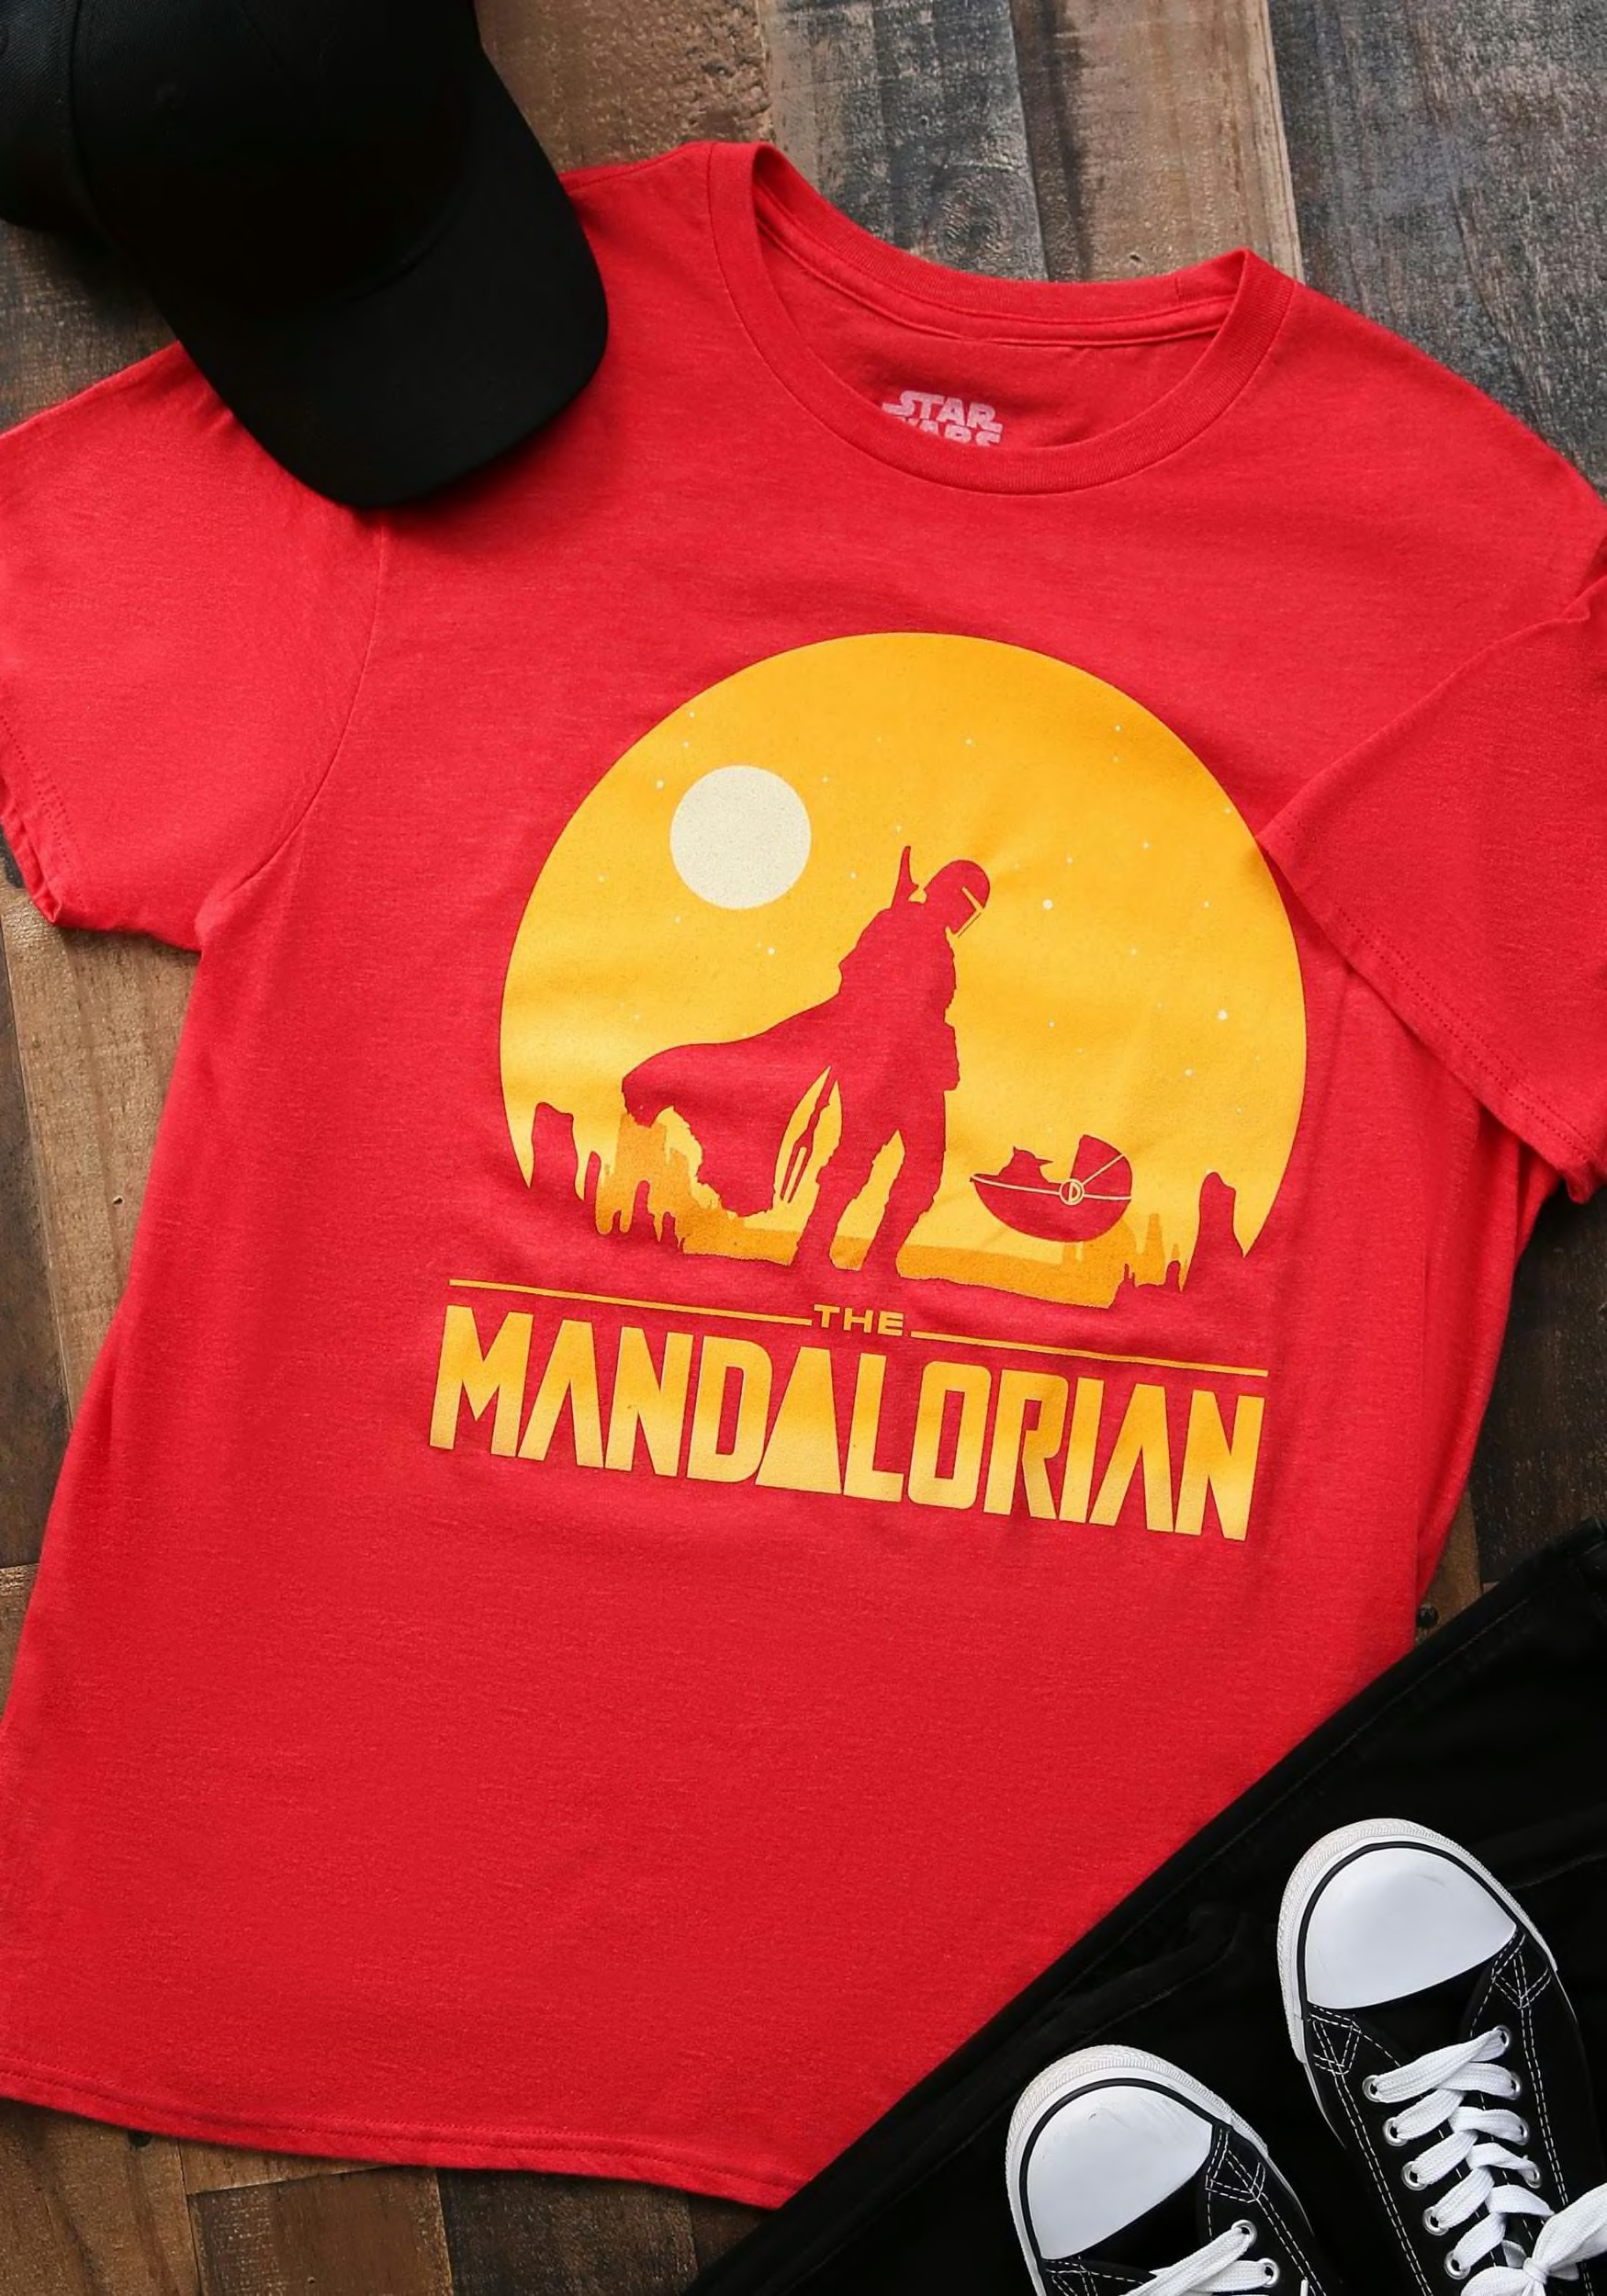 Discover FUN.com's officially licensed and exclusive Star Wars shirts like this The Mandalorian one. 